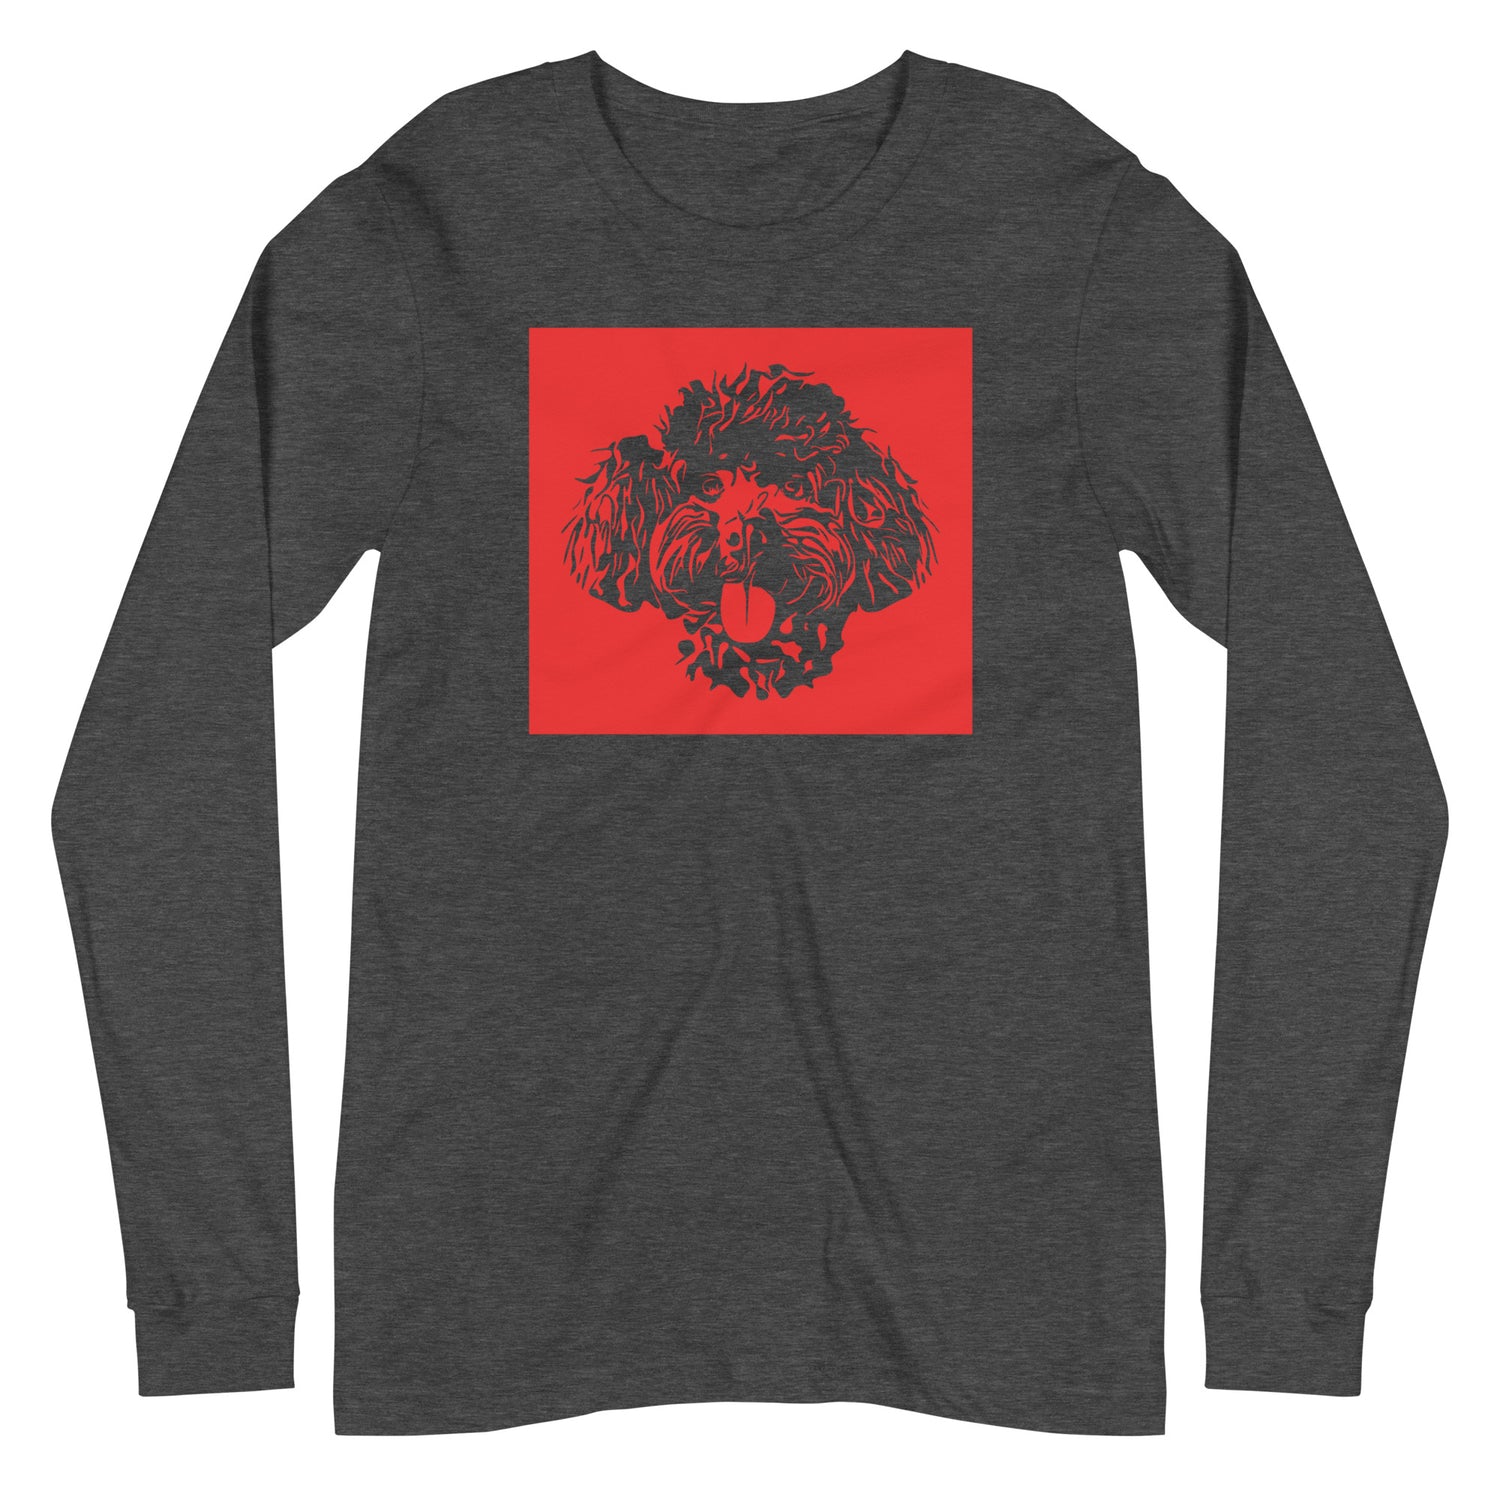 Toy Poodle face silhouette with red background square on unisex dark grey heather long sleeve t-shirt